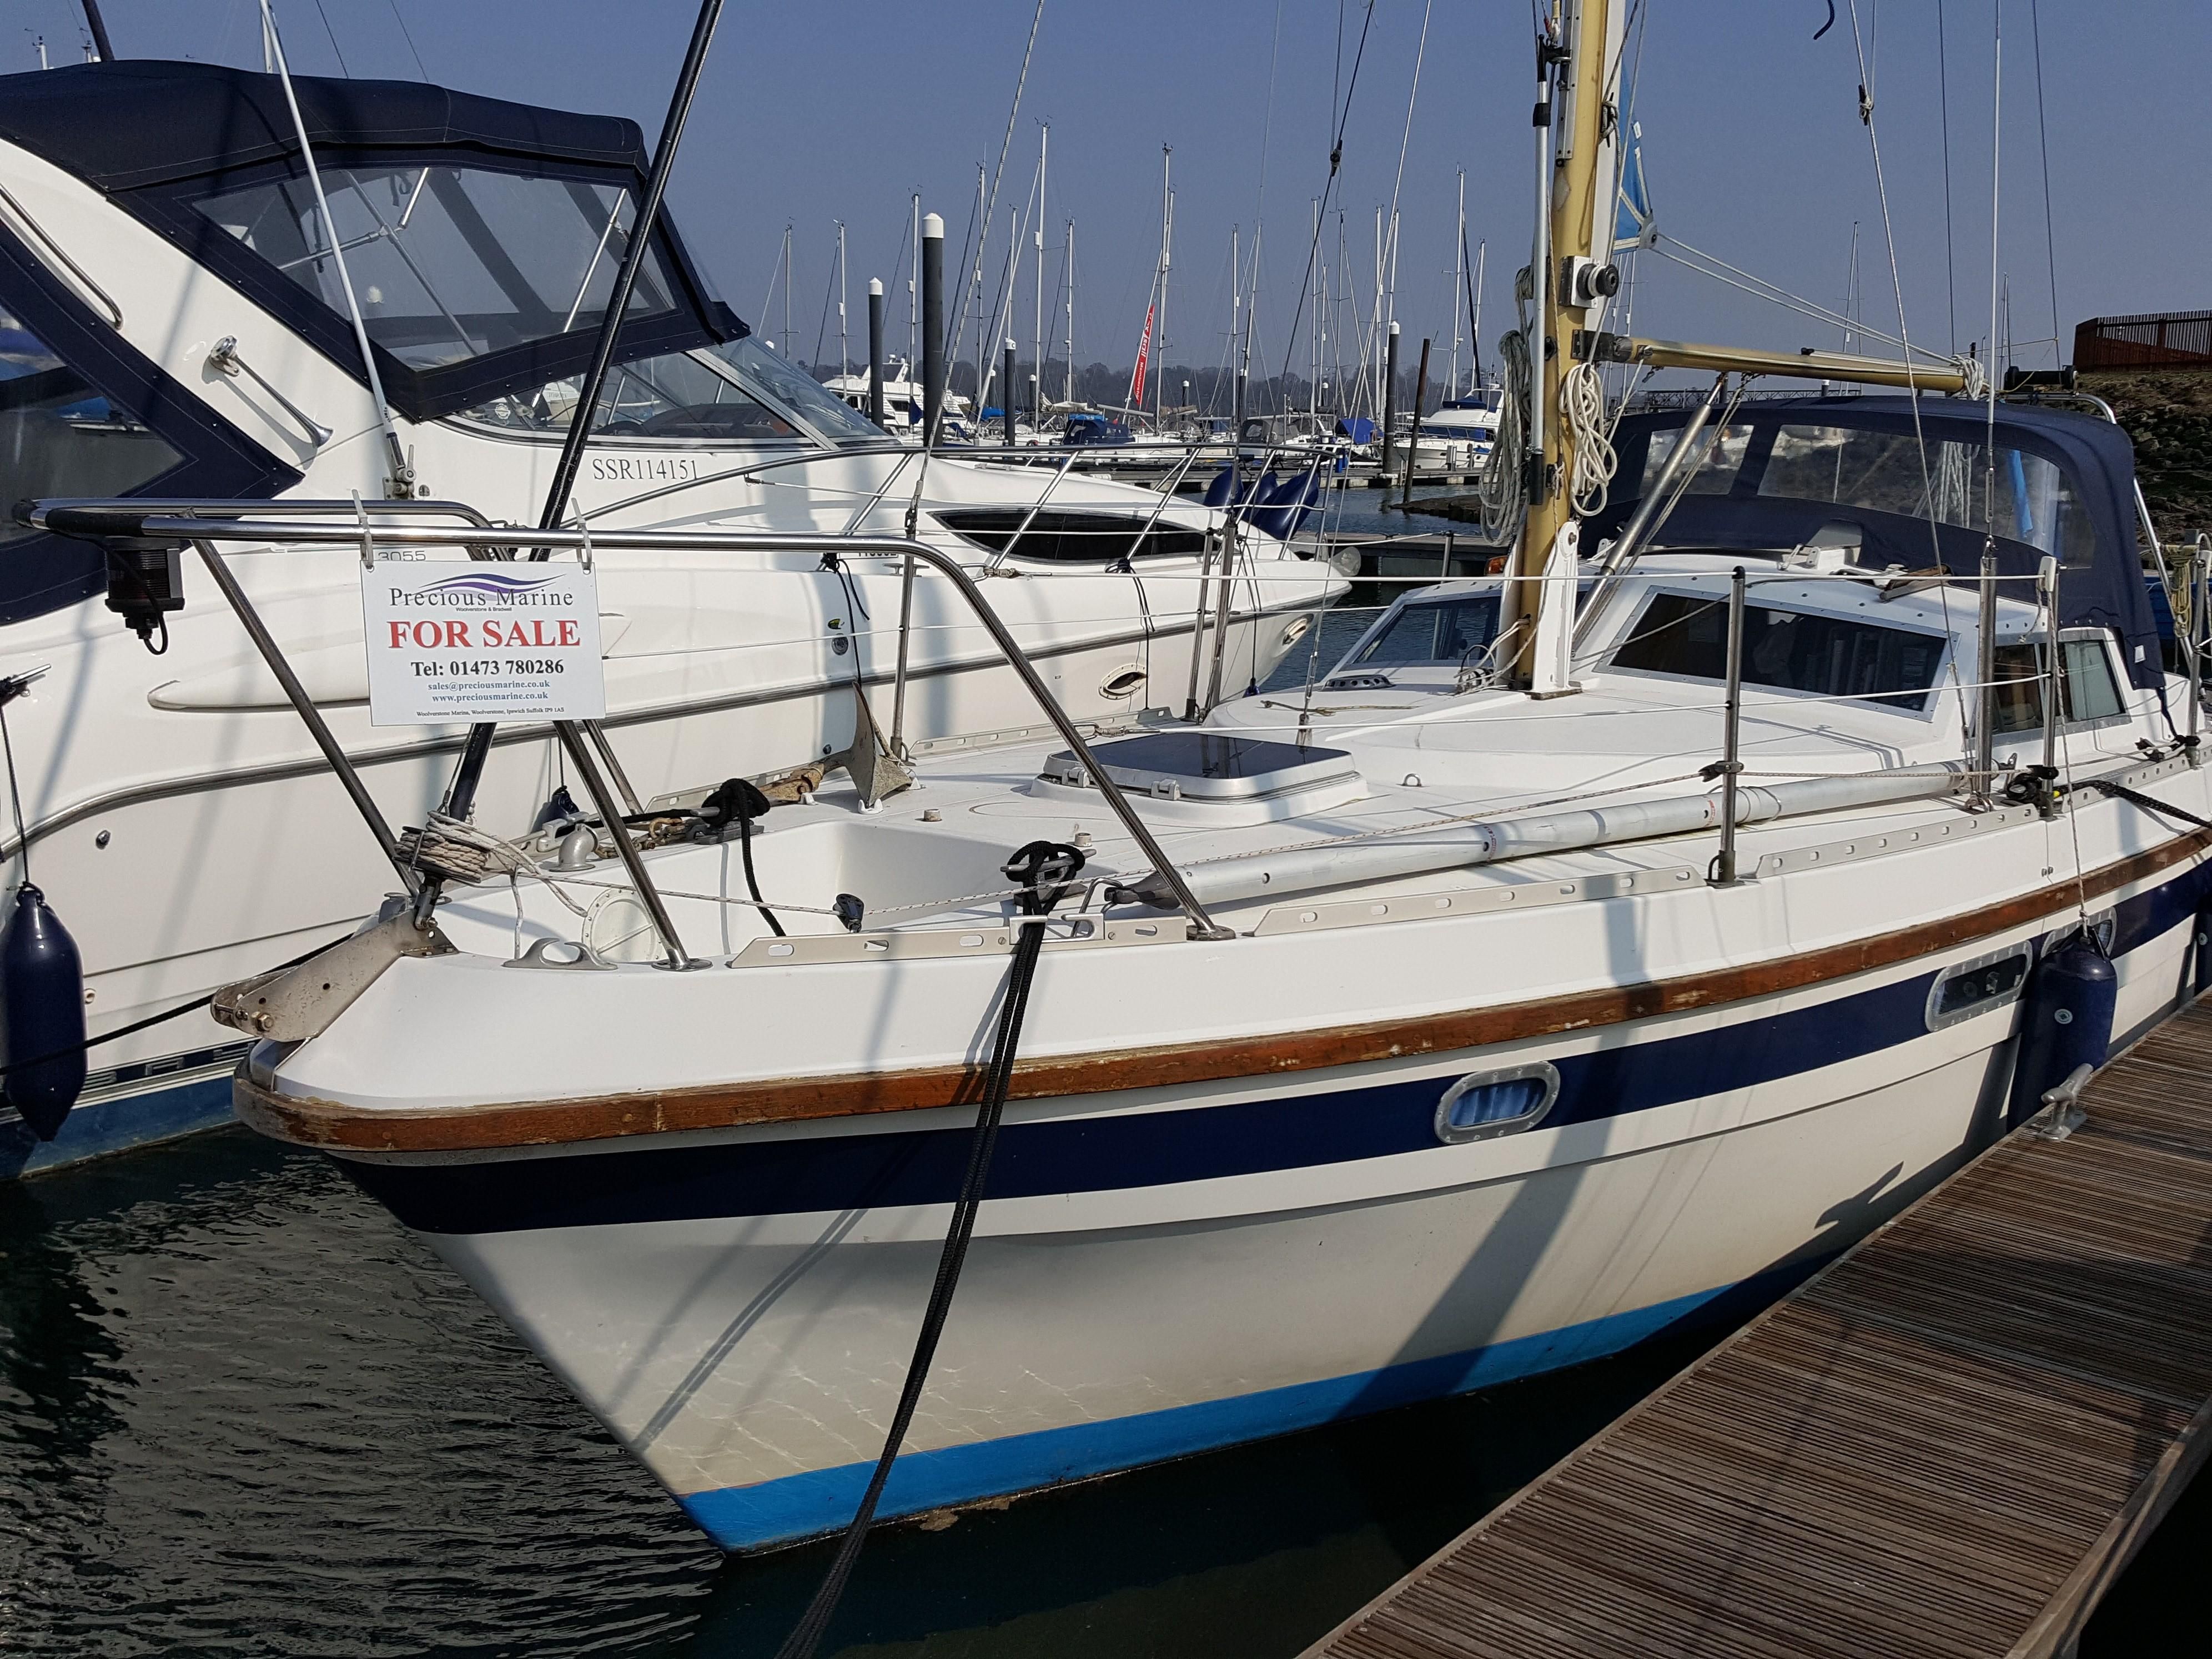 yacht boat for sale uk